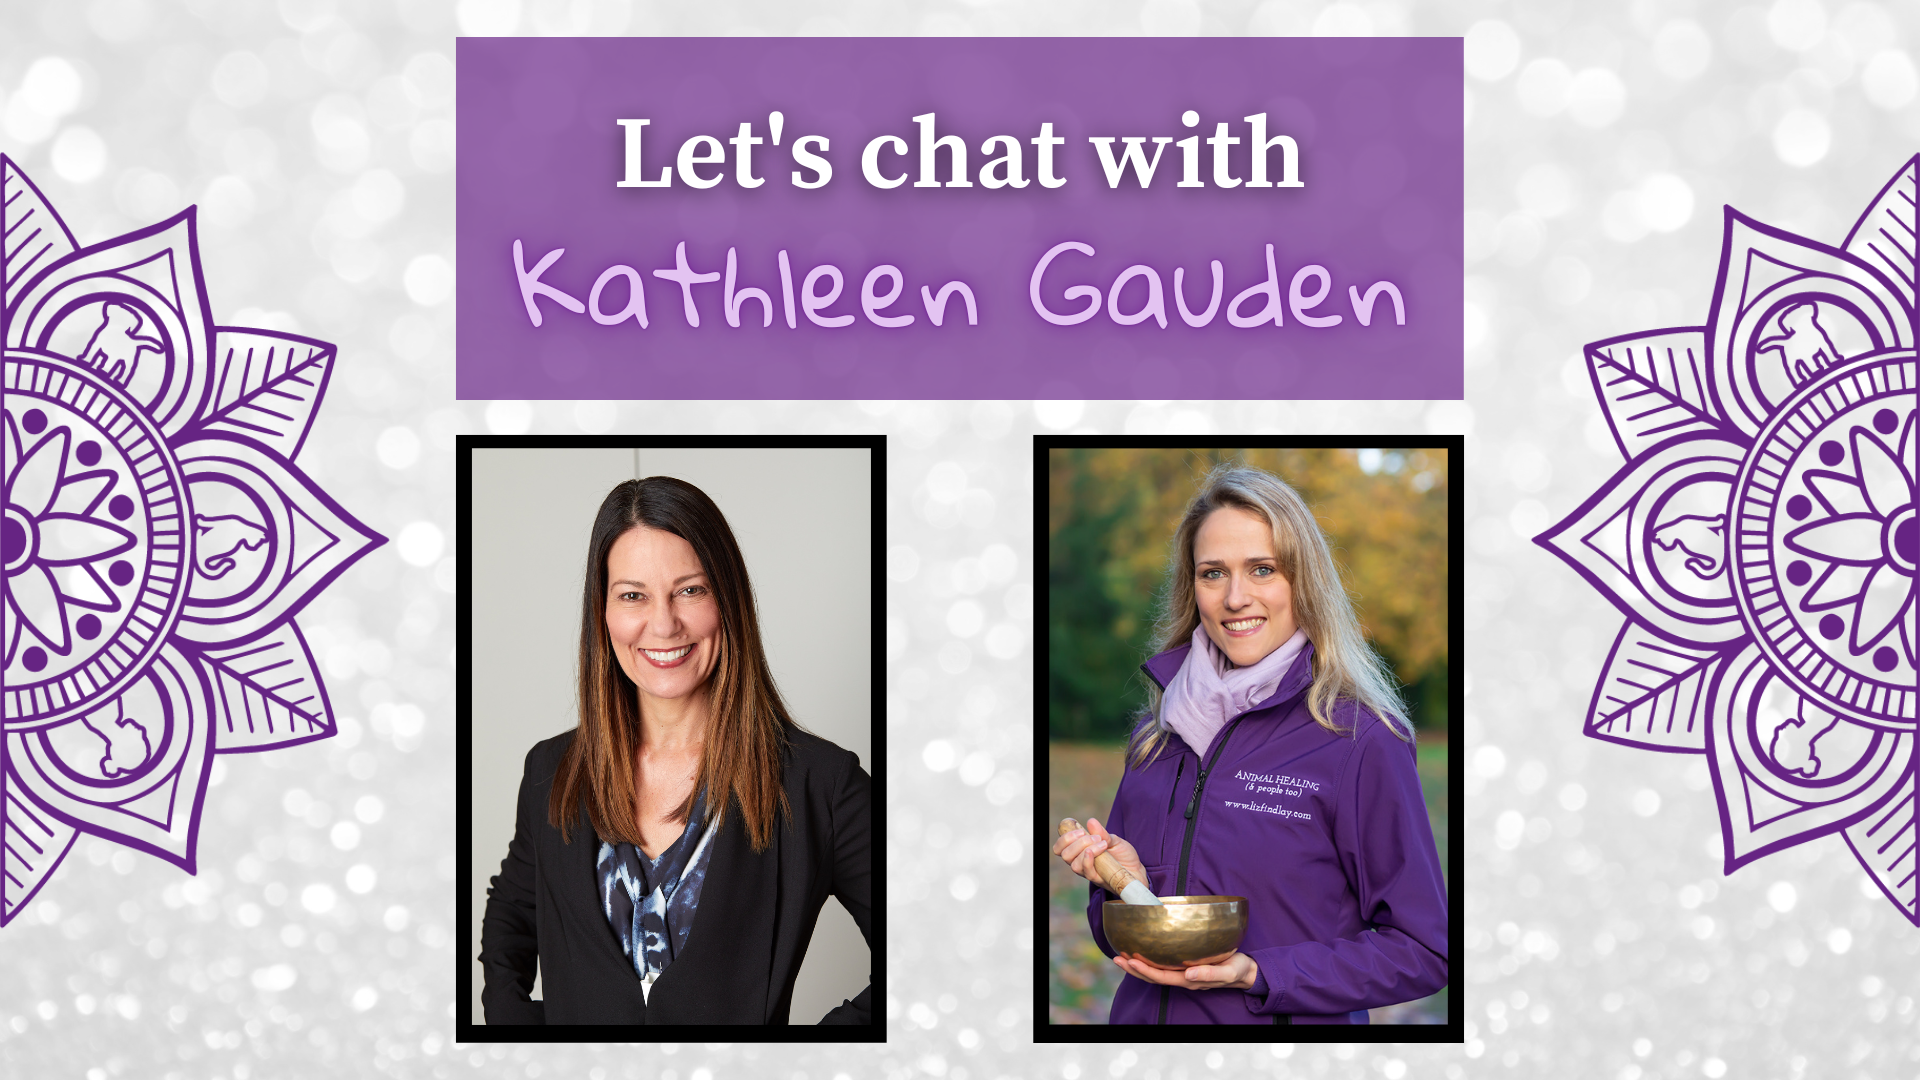 Kathleen Gauden shares a simple tool to get more business.